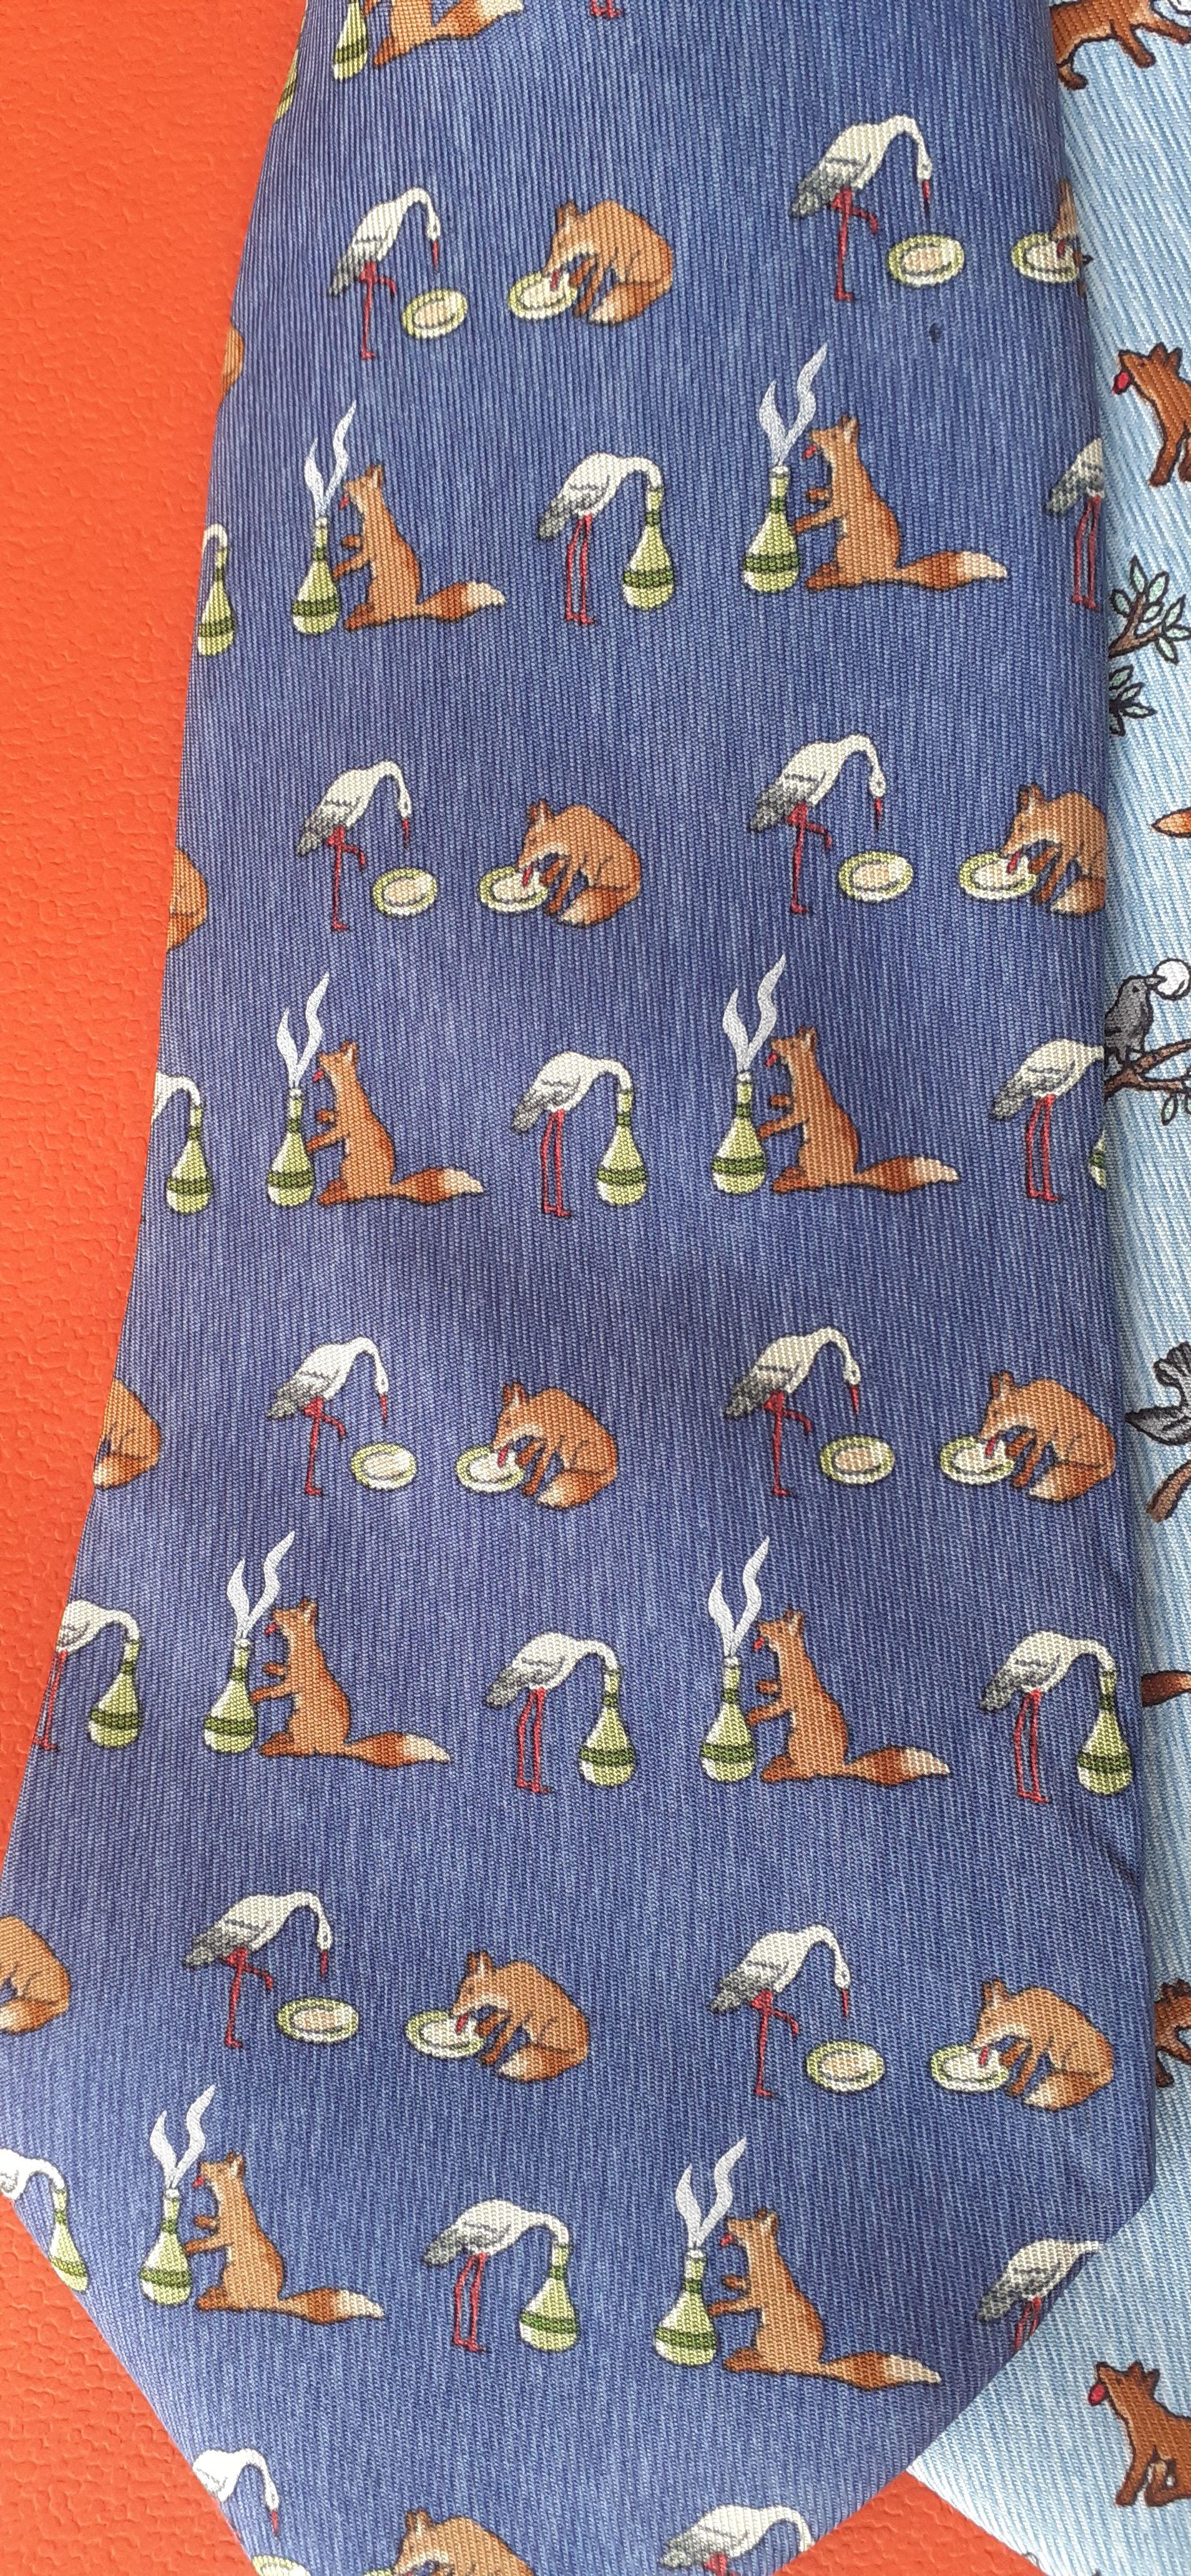 Men's Exceptional Set of 4 Hermès Ties from The Fables of La Fontaine in Silk